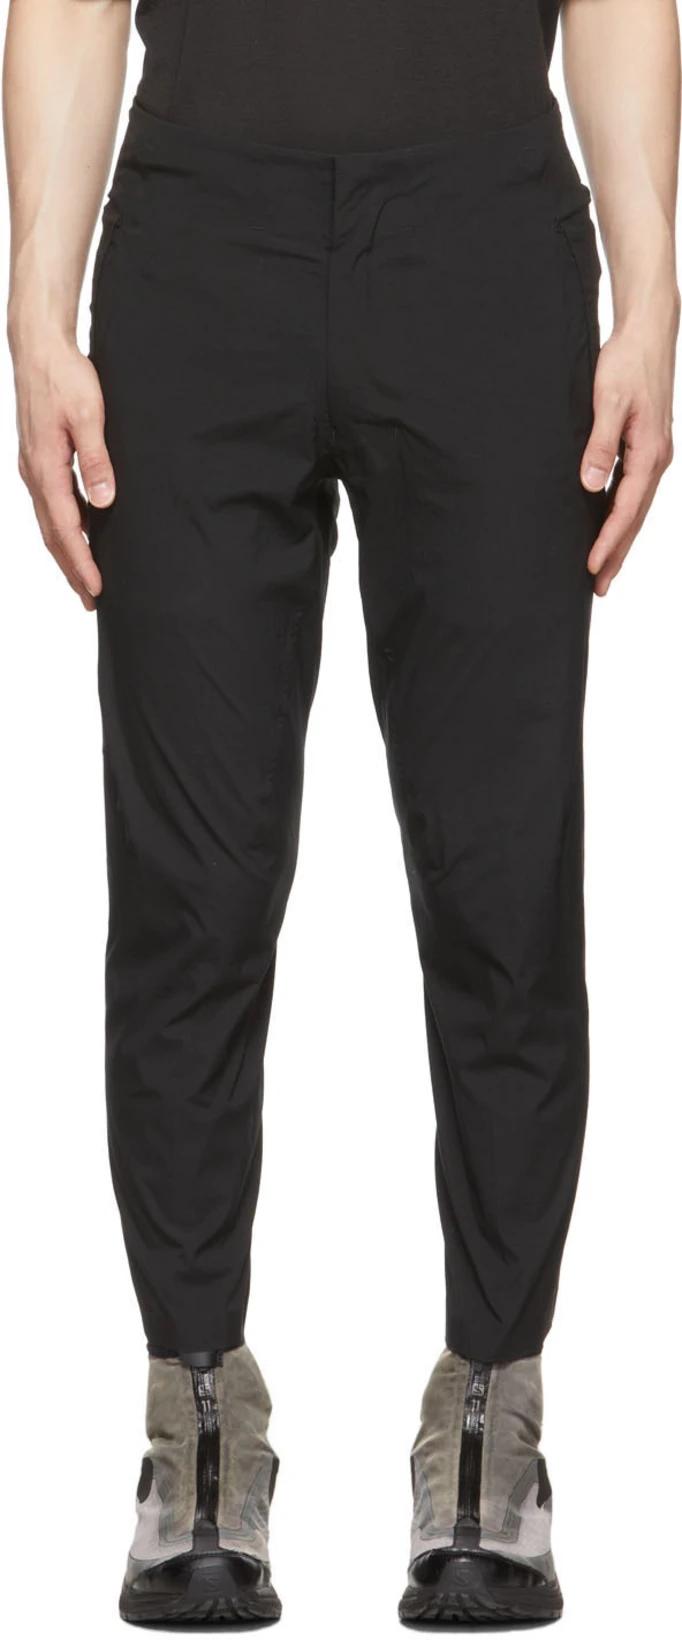 Black Polyester Trousers by DESCENTE A LL TE RR AI N